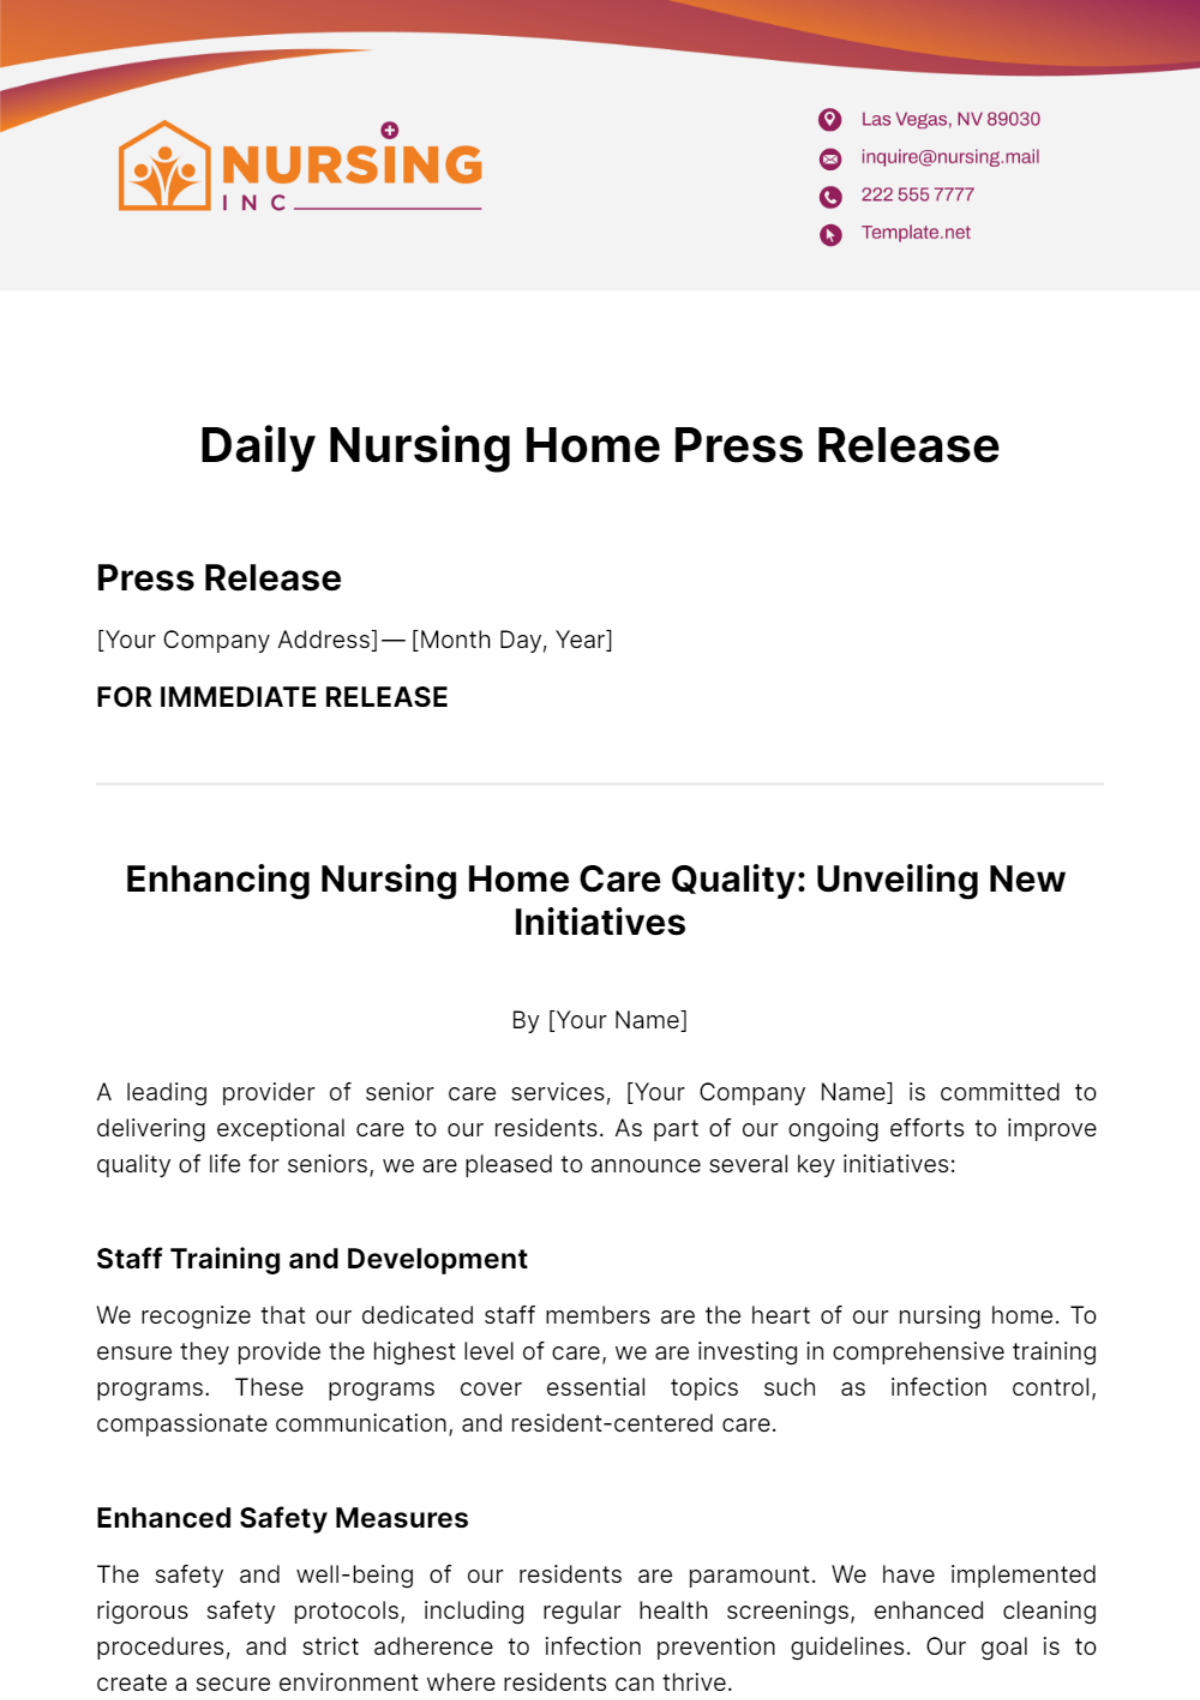 Free Daily Nursing Home Press Release Template